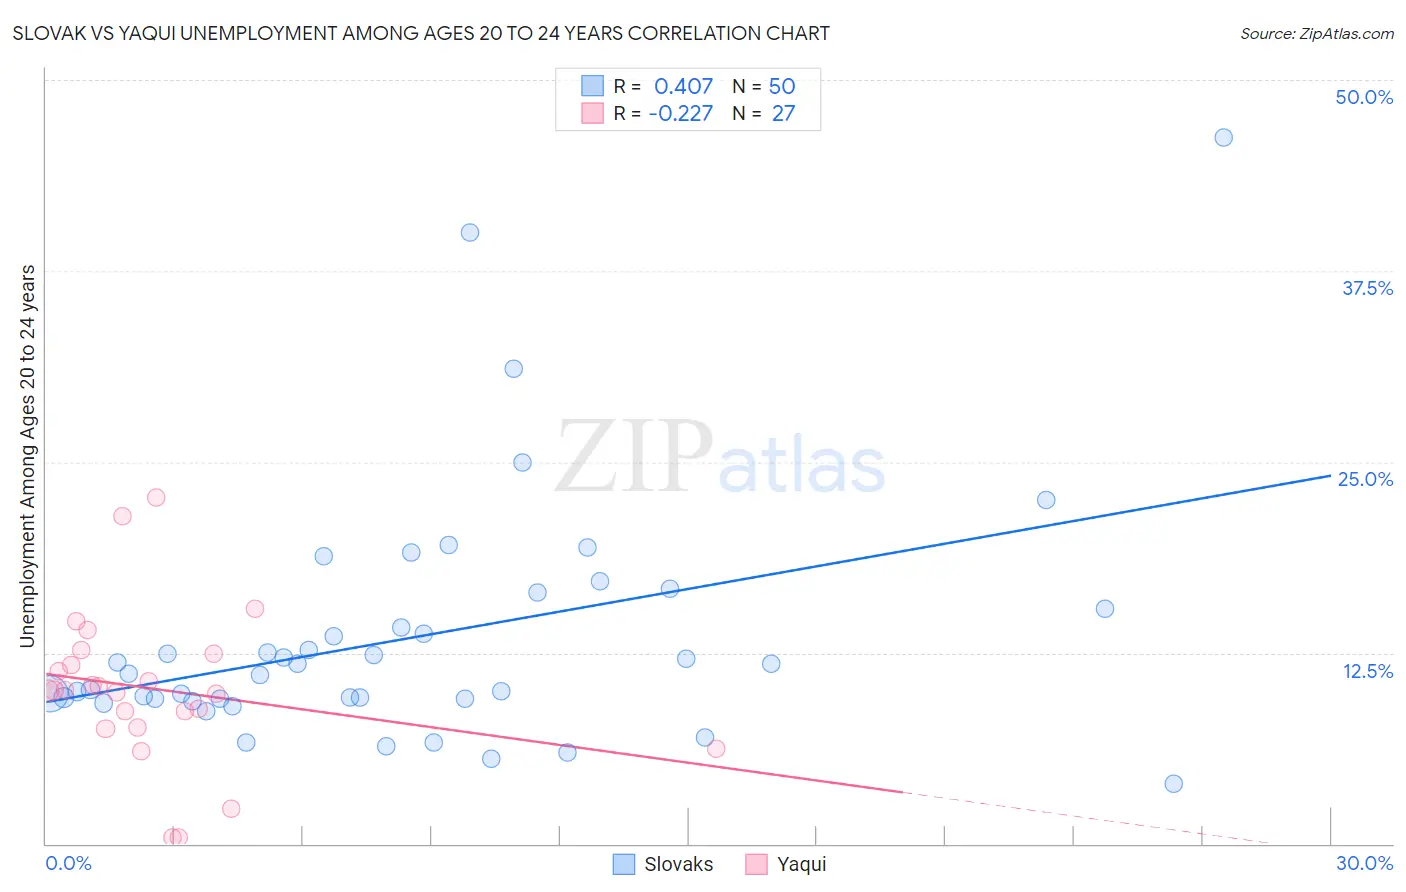 Slovak vs Yaqui Unemployment Among Ages 20 to 24 years